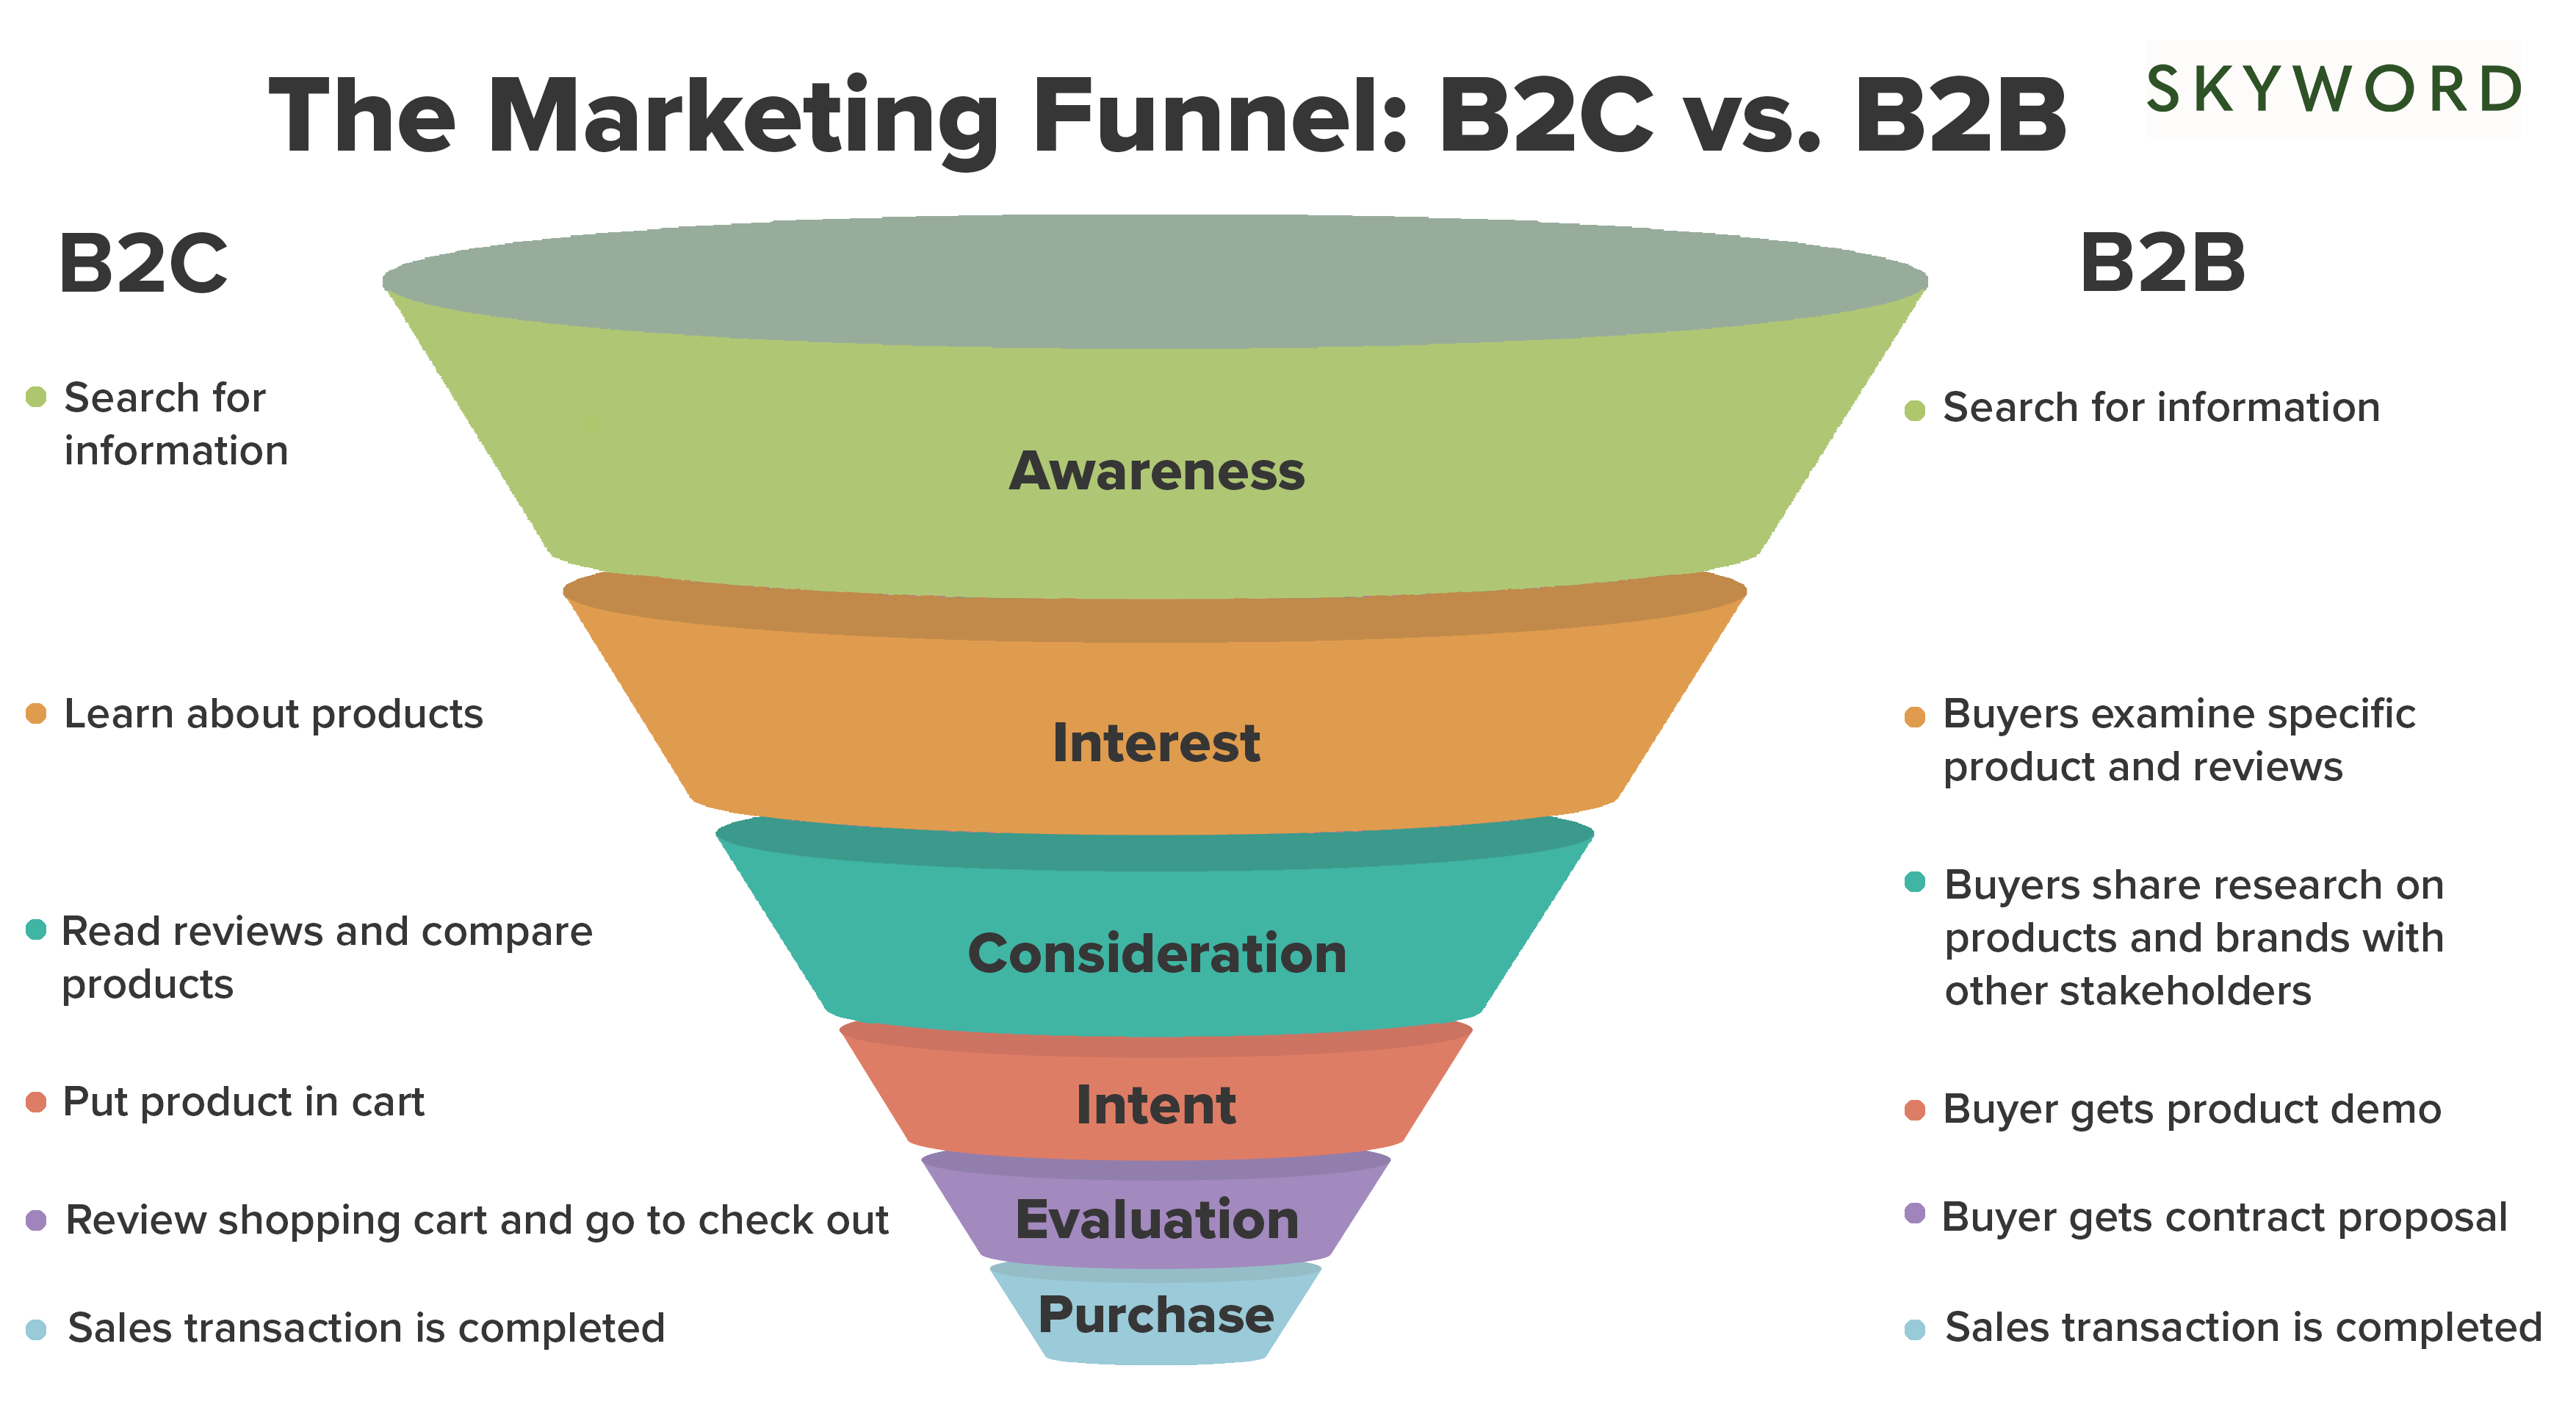 How the Marketing Funnel Works From Top to Bottom